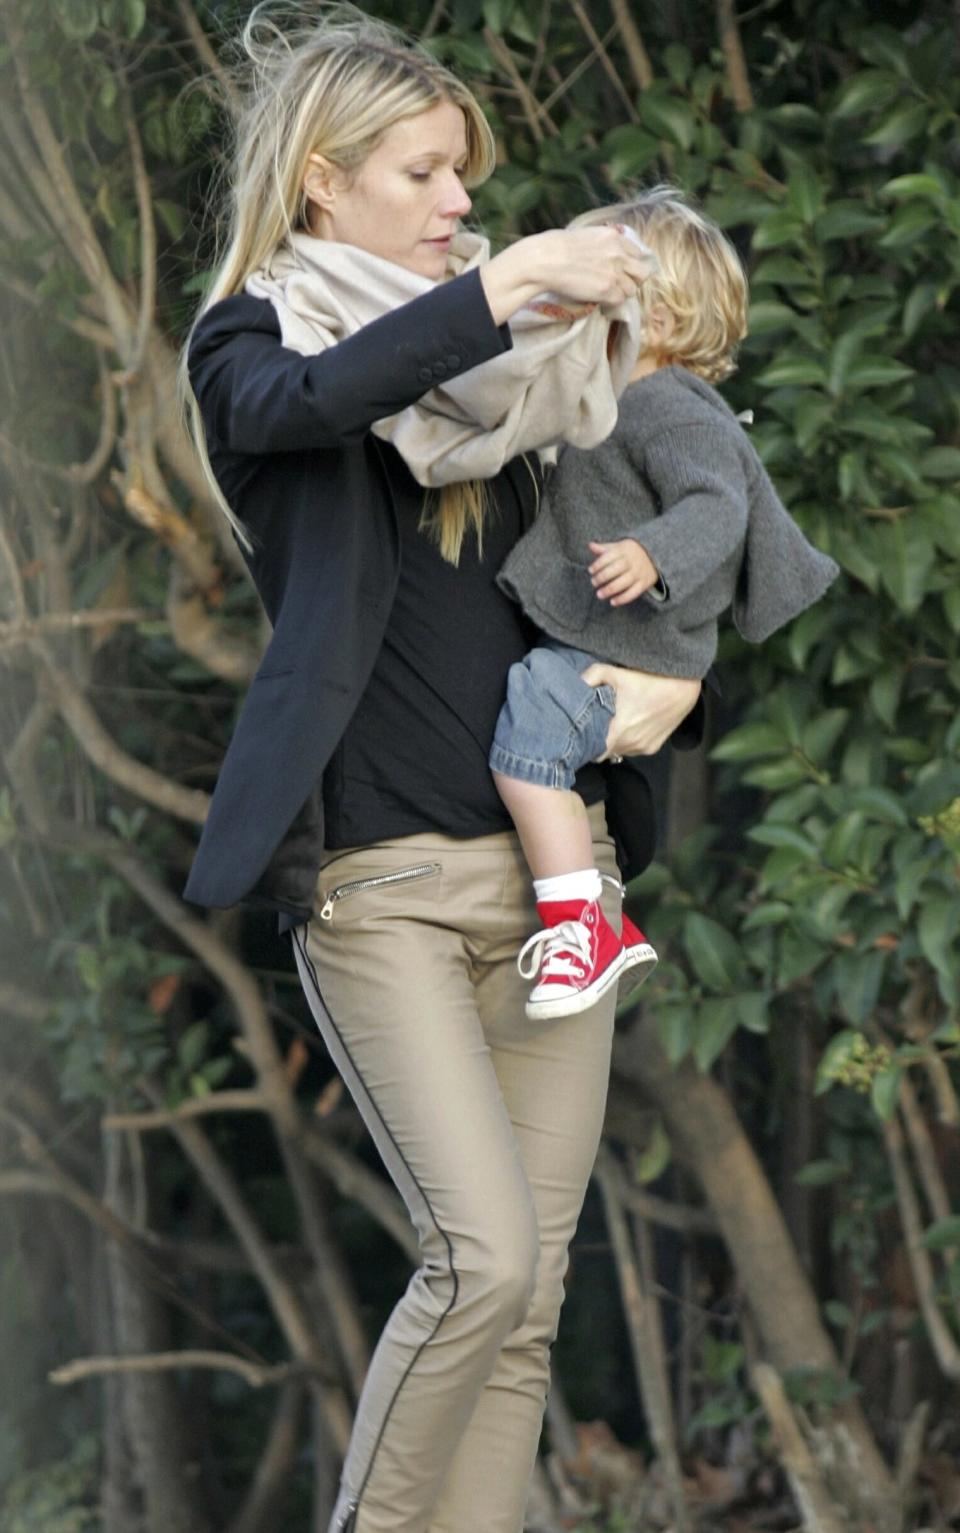 Gwnyeth Paltrow with her son, Moses - Credit: REX Features